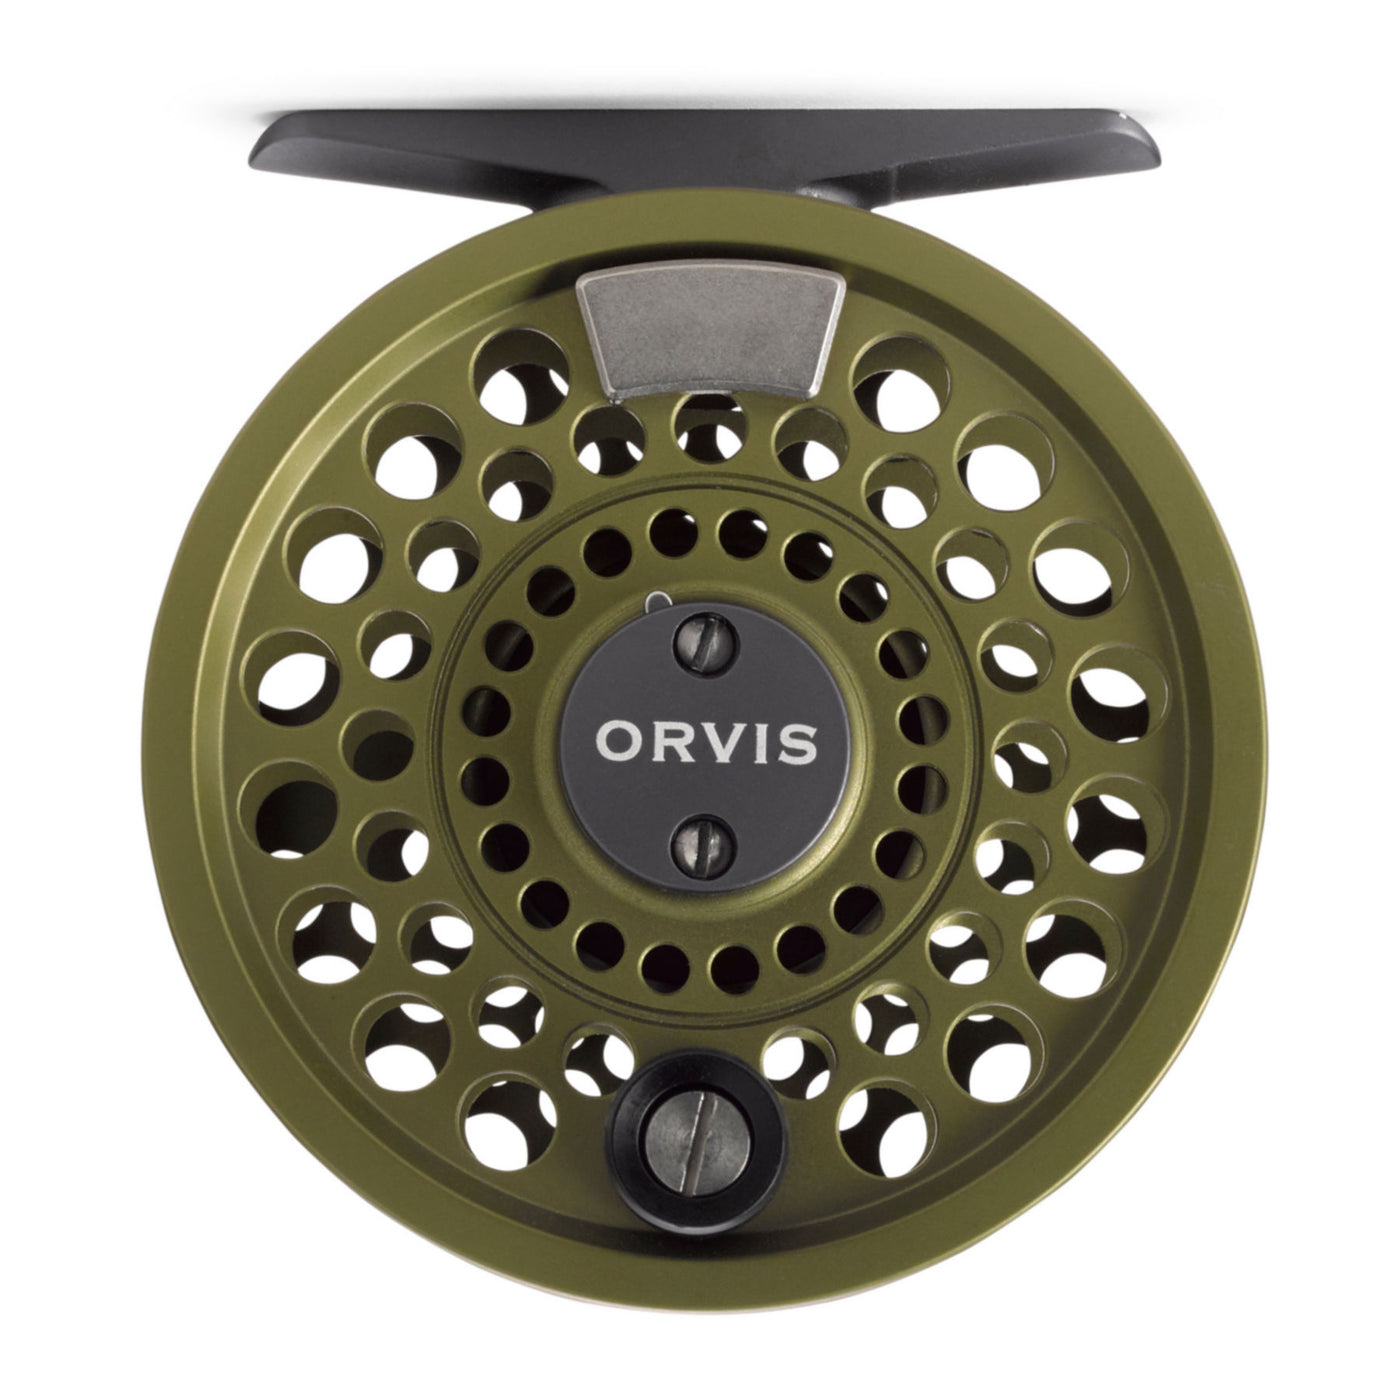 Orvis Battenkill Disc Reels for Sale • Fly Fishing Outfitters